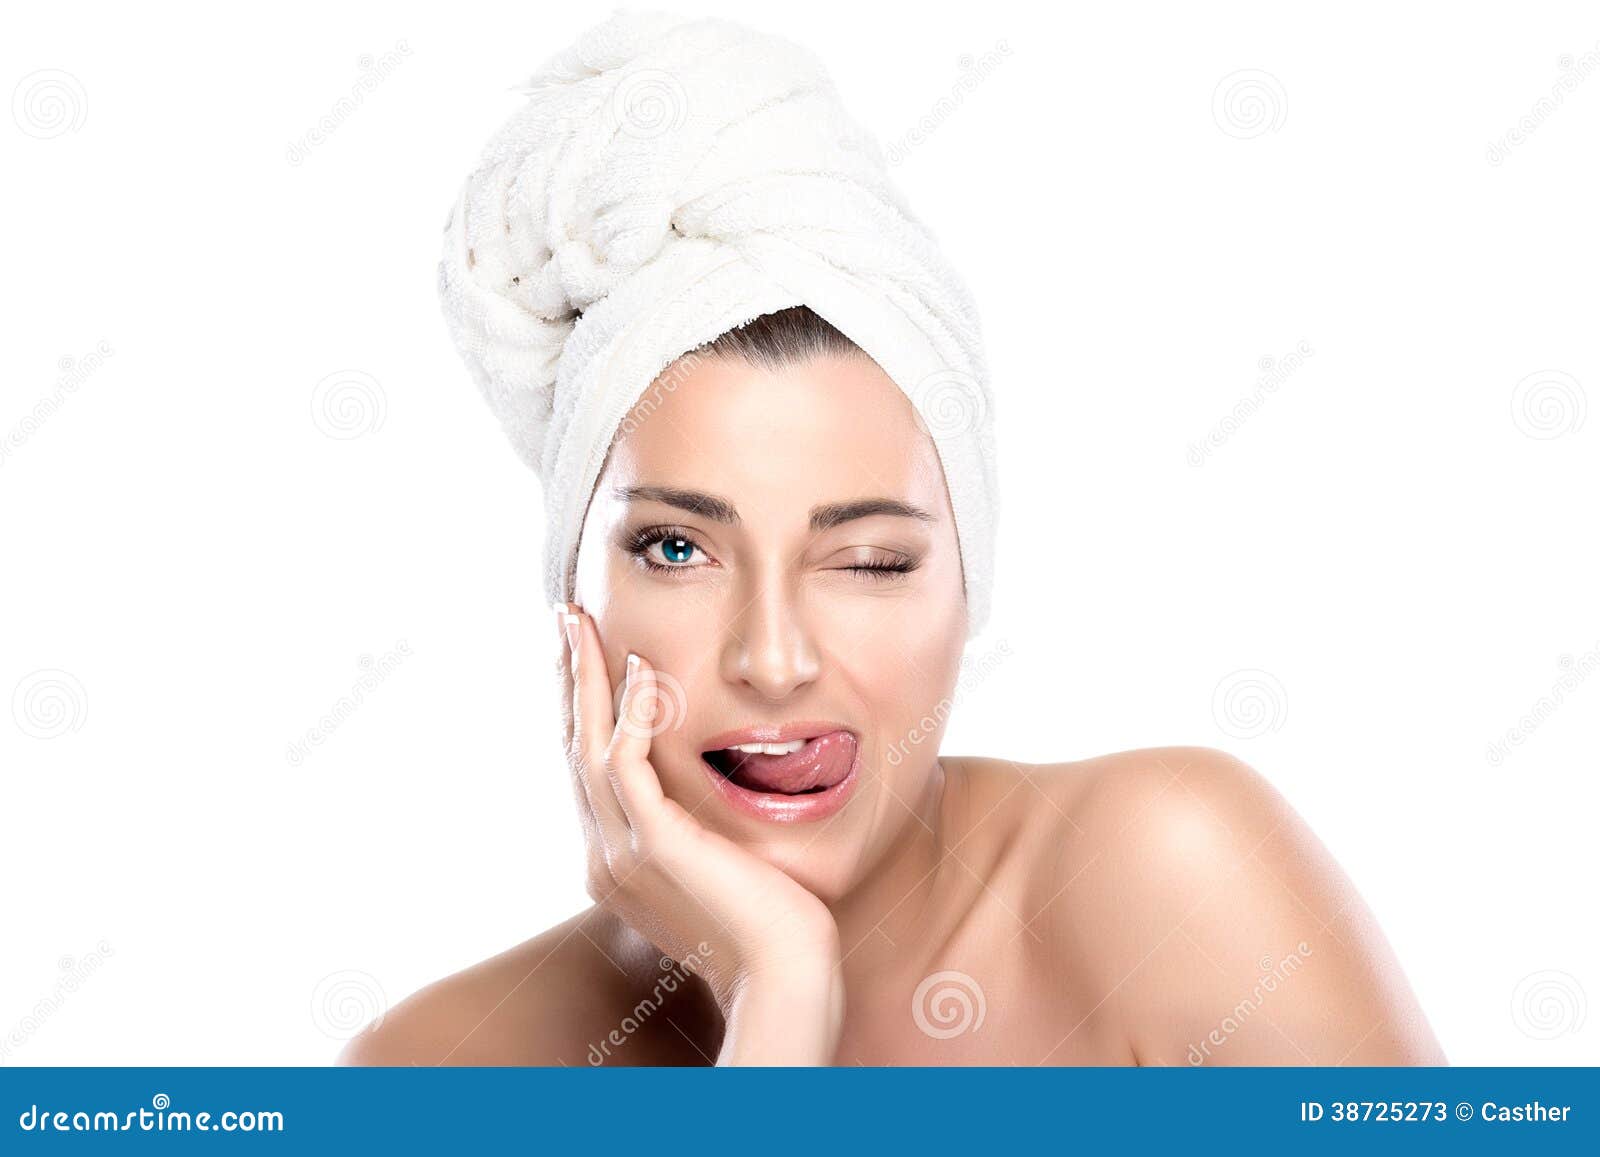 Girl Winking With Funny Expression Spa Woman Stock Image Image Of Haircare Funny 38725273